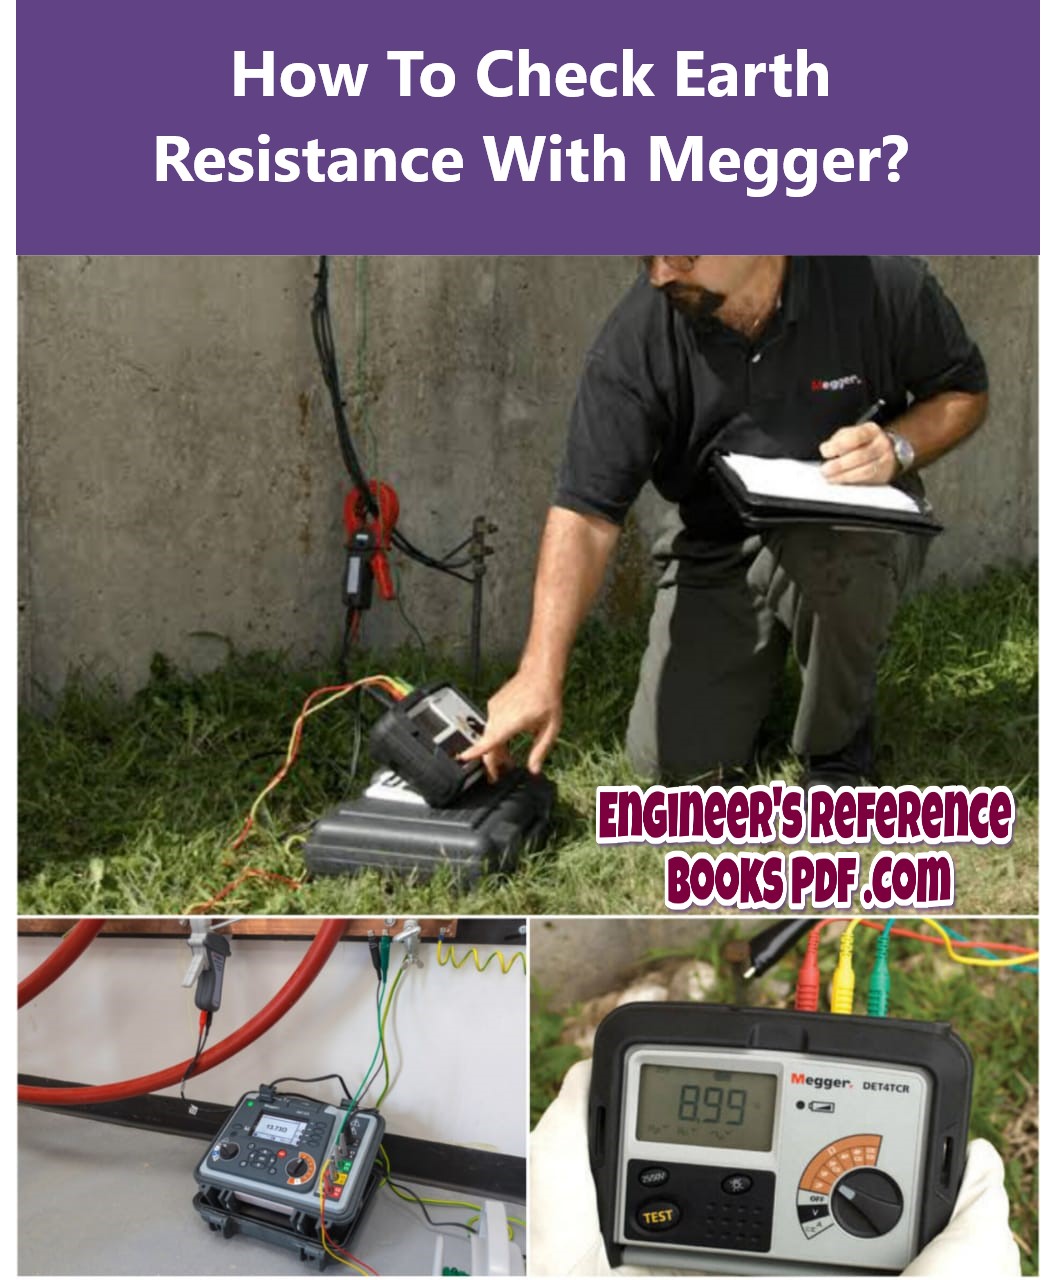 How To Check Earth Resistance With Megger?
